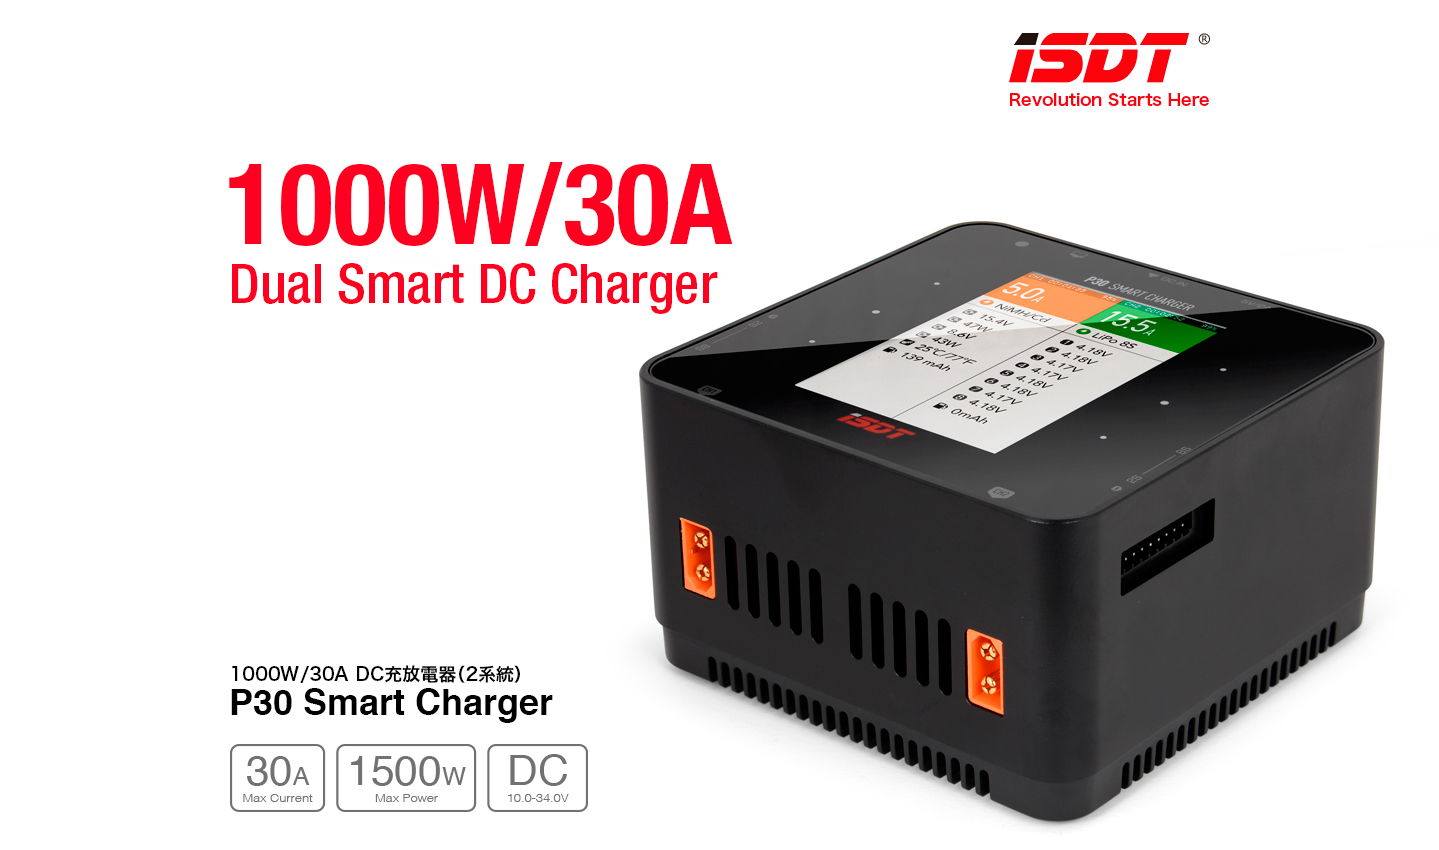 500W/20A iSDT Q8 Smart DC Charger